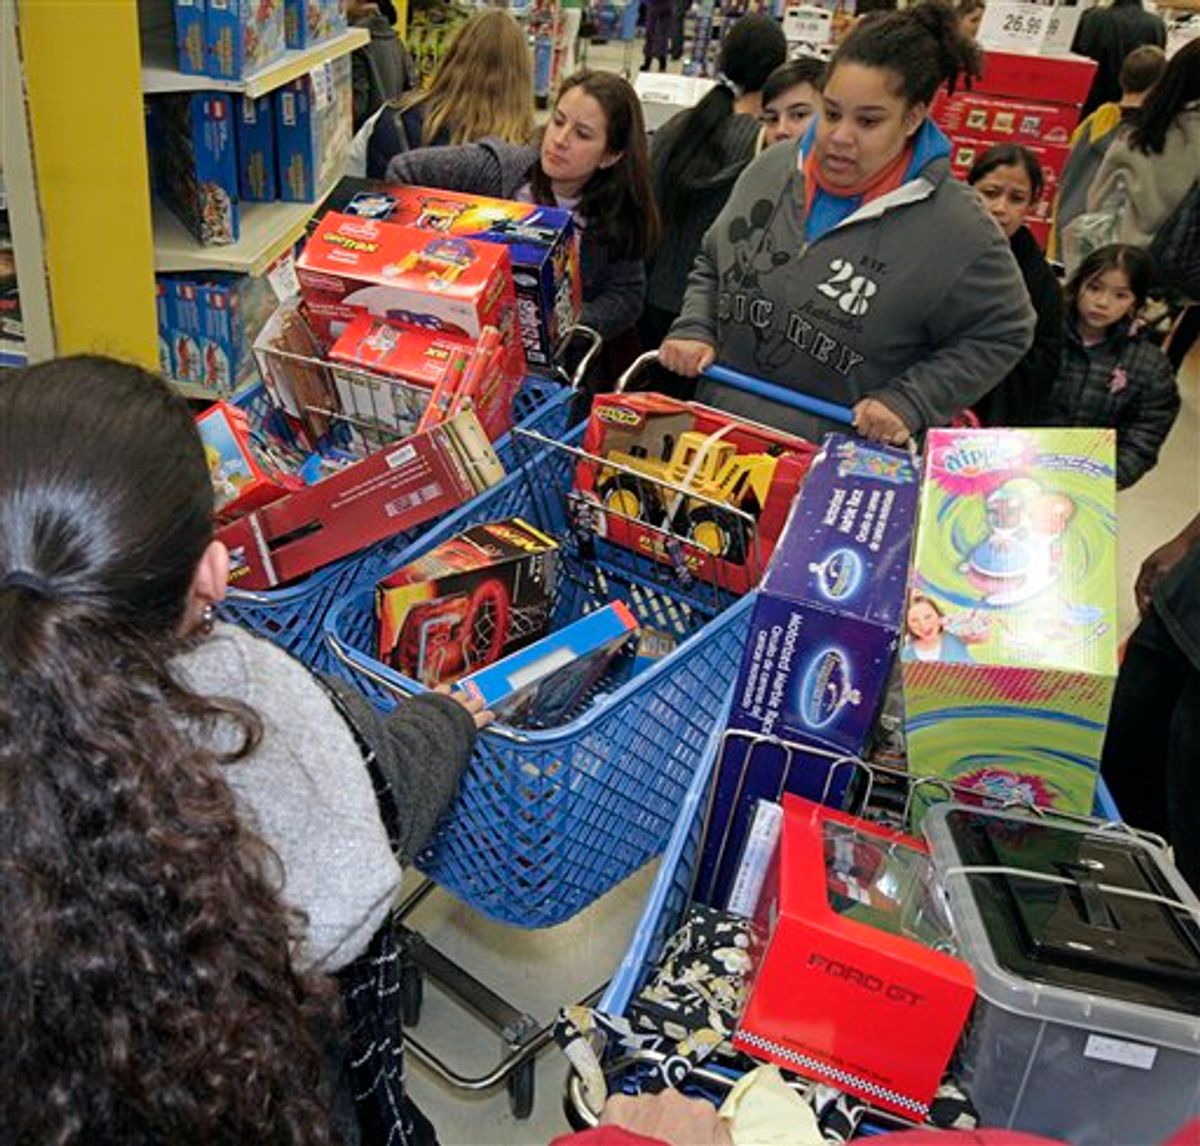 A traffic jam is negotiated in the aisles of Toys R Us, in San Rafael Calif., Thursday Nov. 25, 2010 which was crowed with Black Friday shoppers. (AP Photo/Mike Adaskaveg)   (AP)